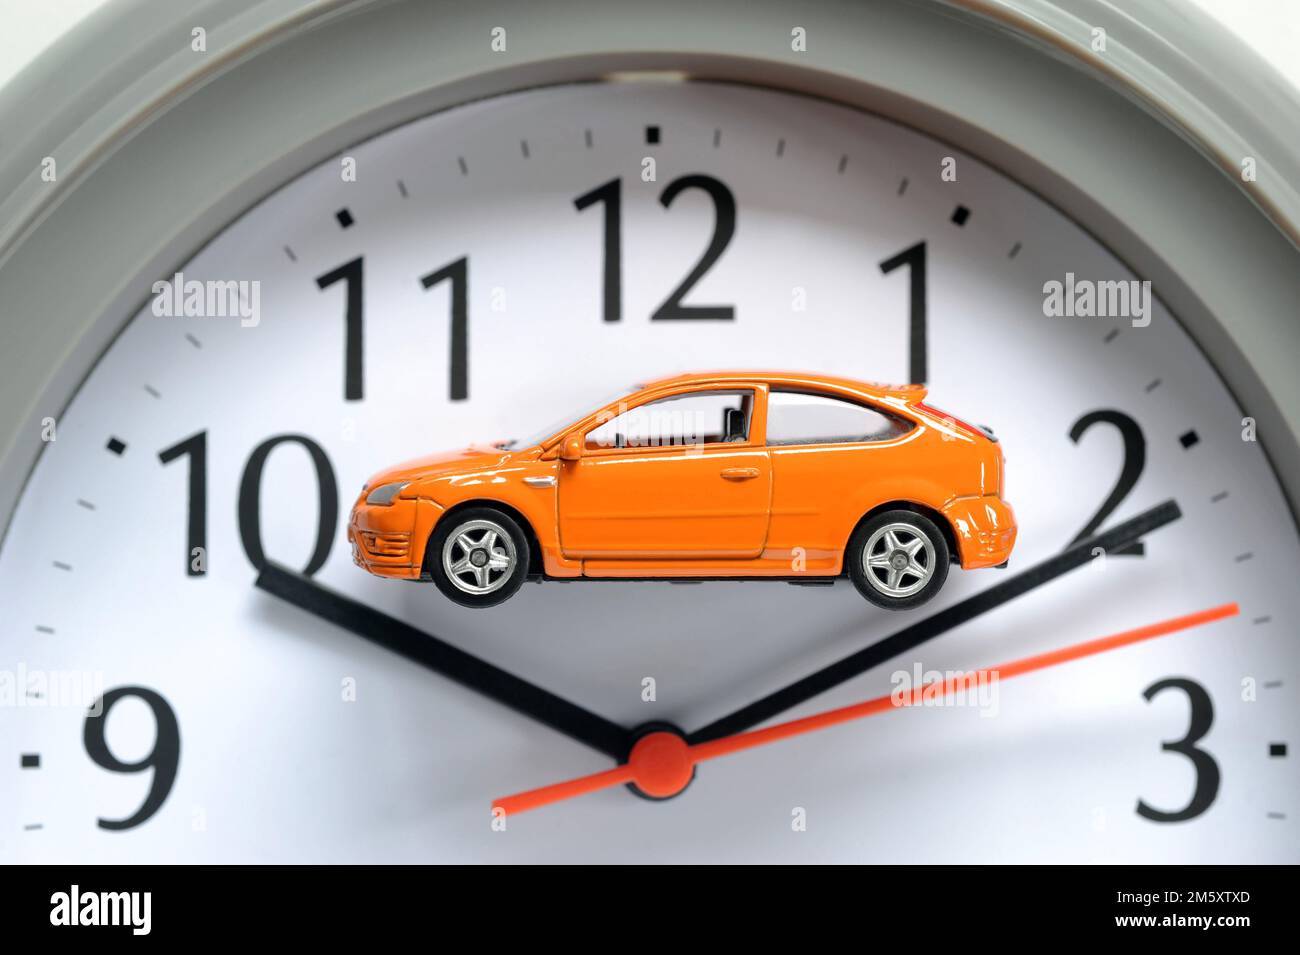 MODEL CAR ON CLOCK FACE RE MOTORISTS CARS ELECTRIC DIESEL PETROL HYBRID SCRAP TIME RUNNING OUT COSTS REPAIRS SECOND HAND CAR BUYERS ETC UK Stock Photo